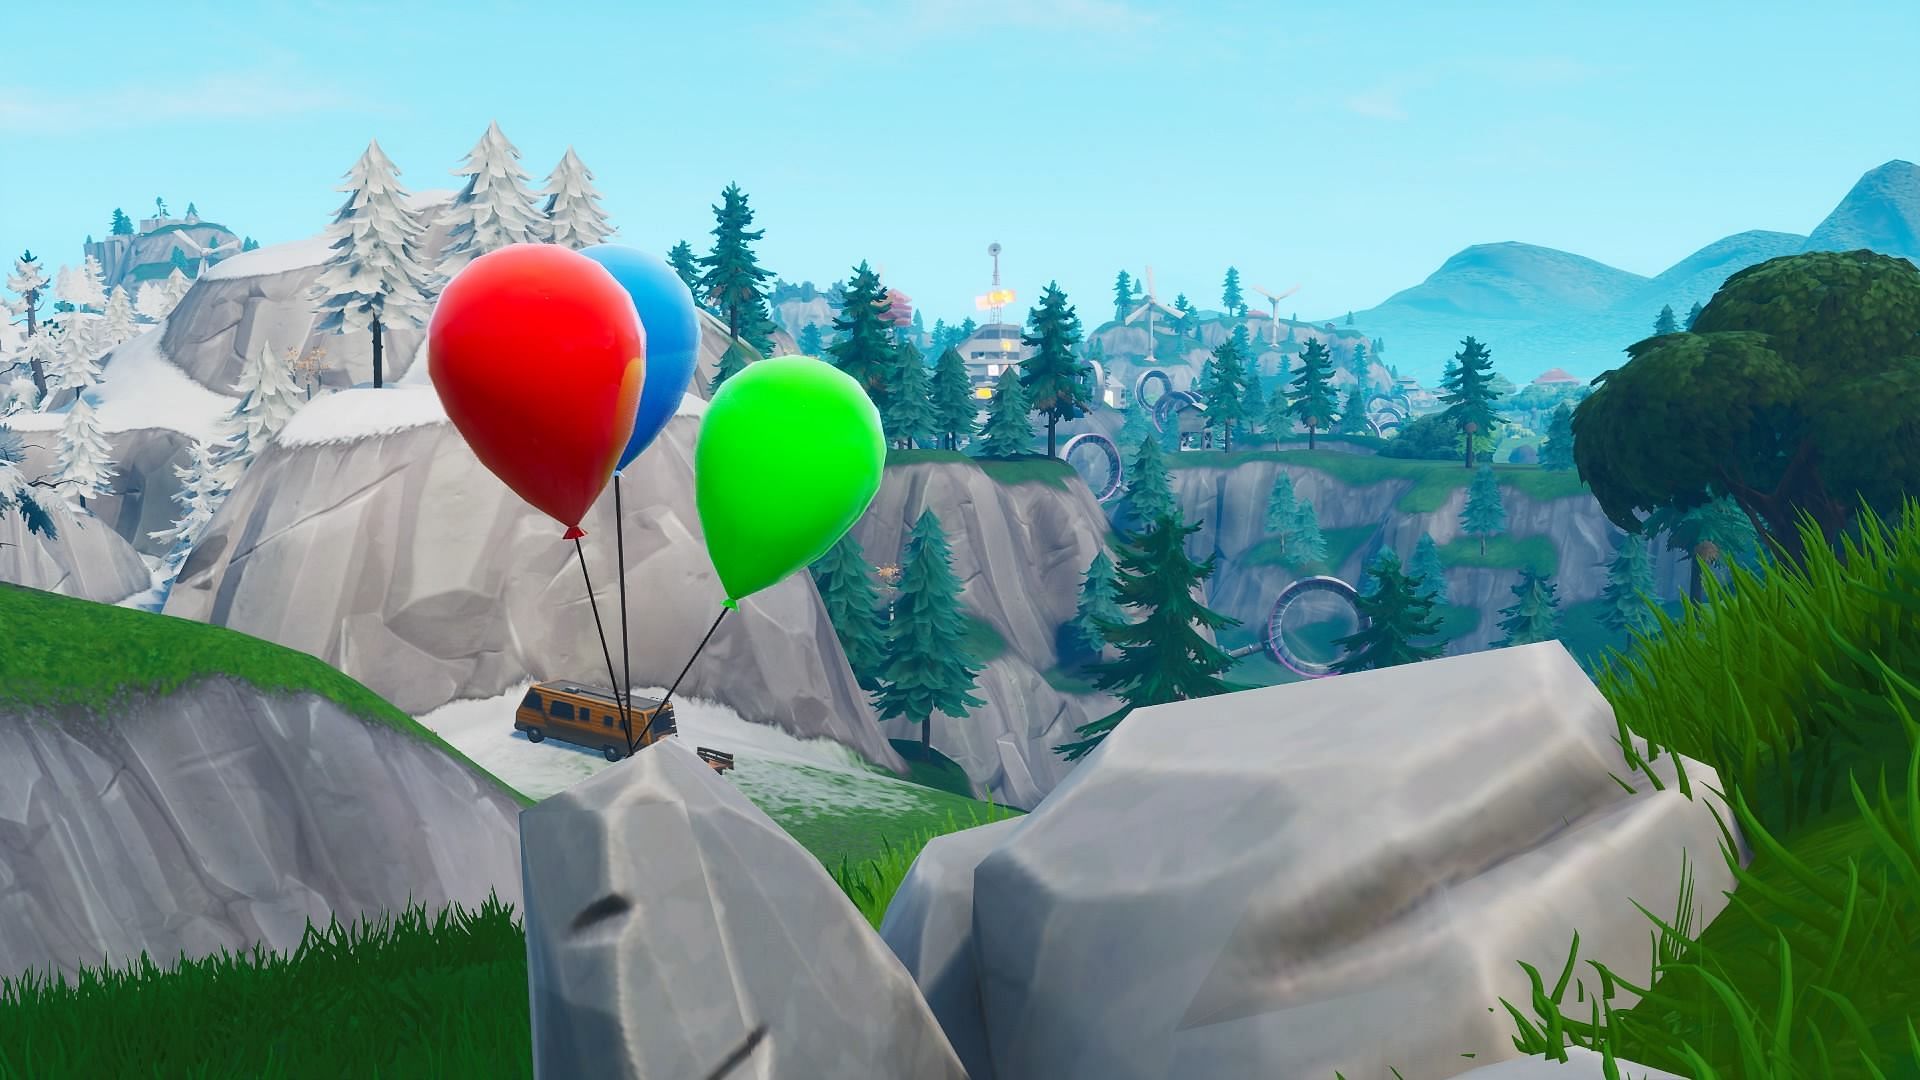 Balloons have been unvaulted for the birthday event (Image via Epic Games)